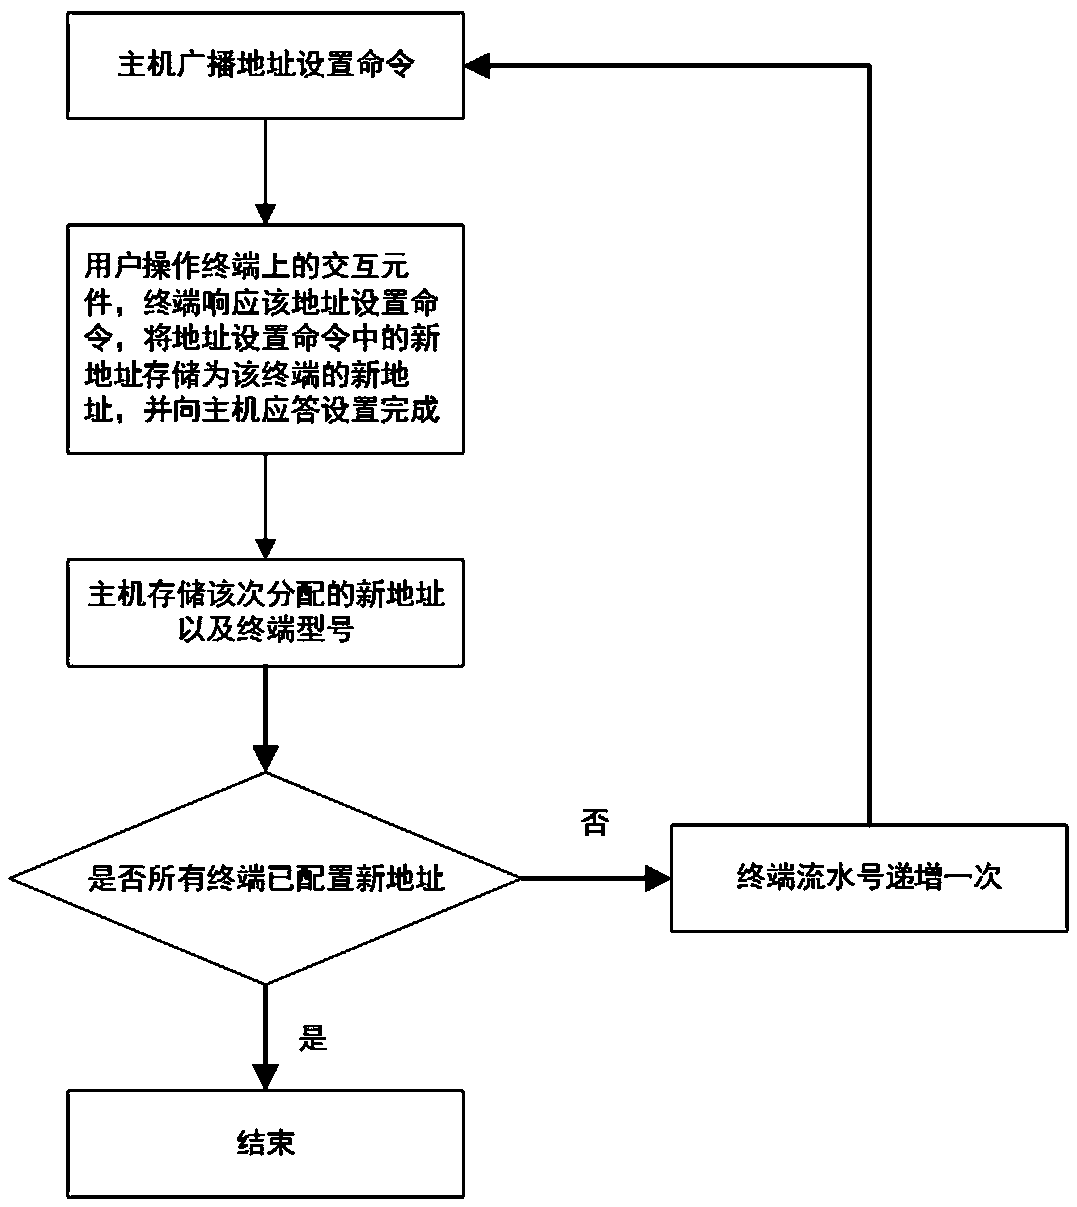 Terminal address allocation method and system